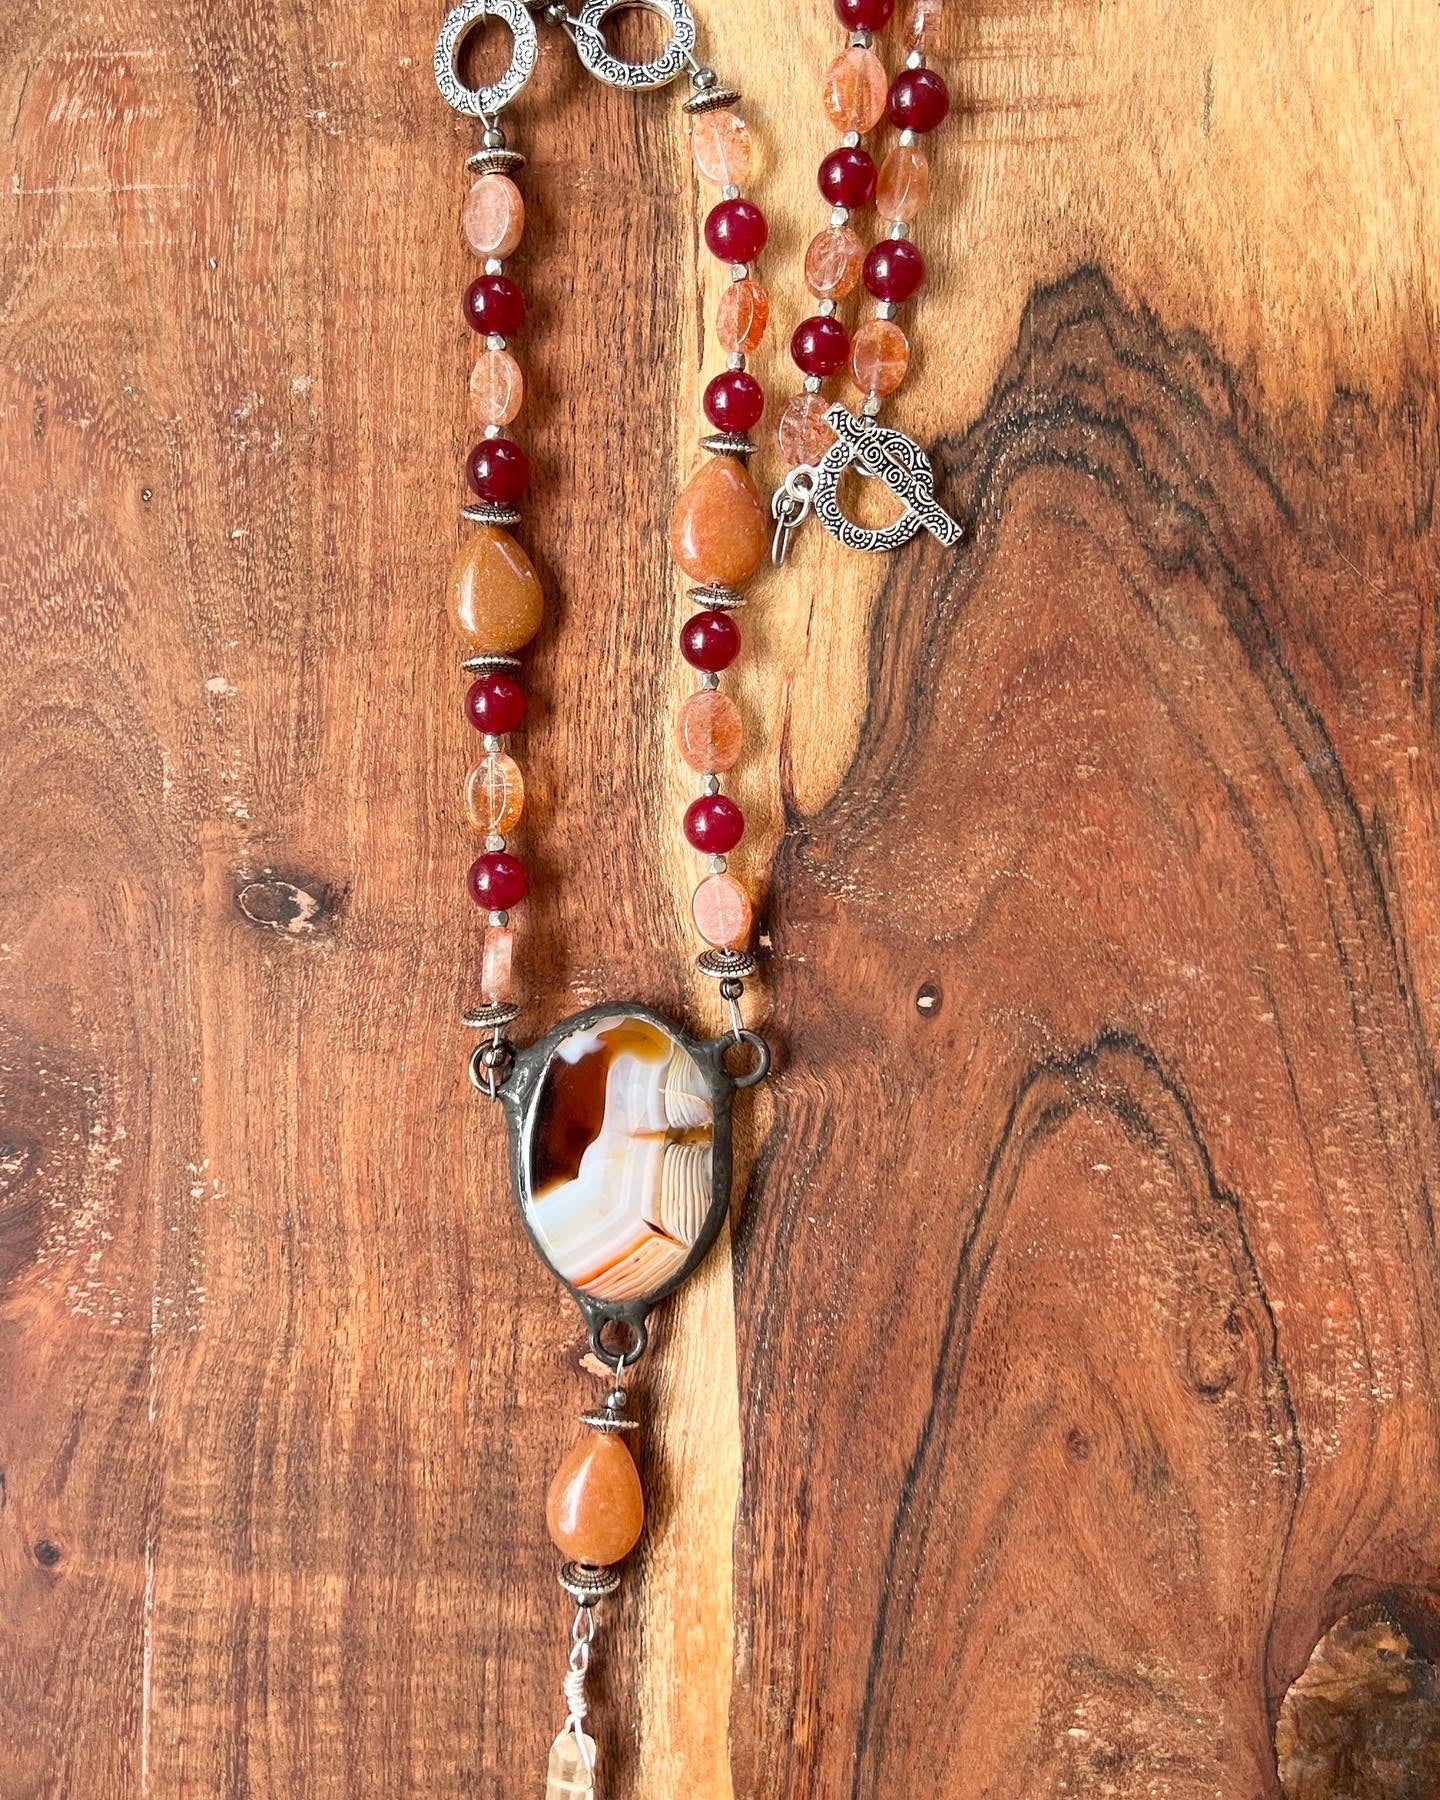 Agate Pendant Necklace with Sunstone Accent Beads